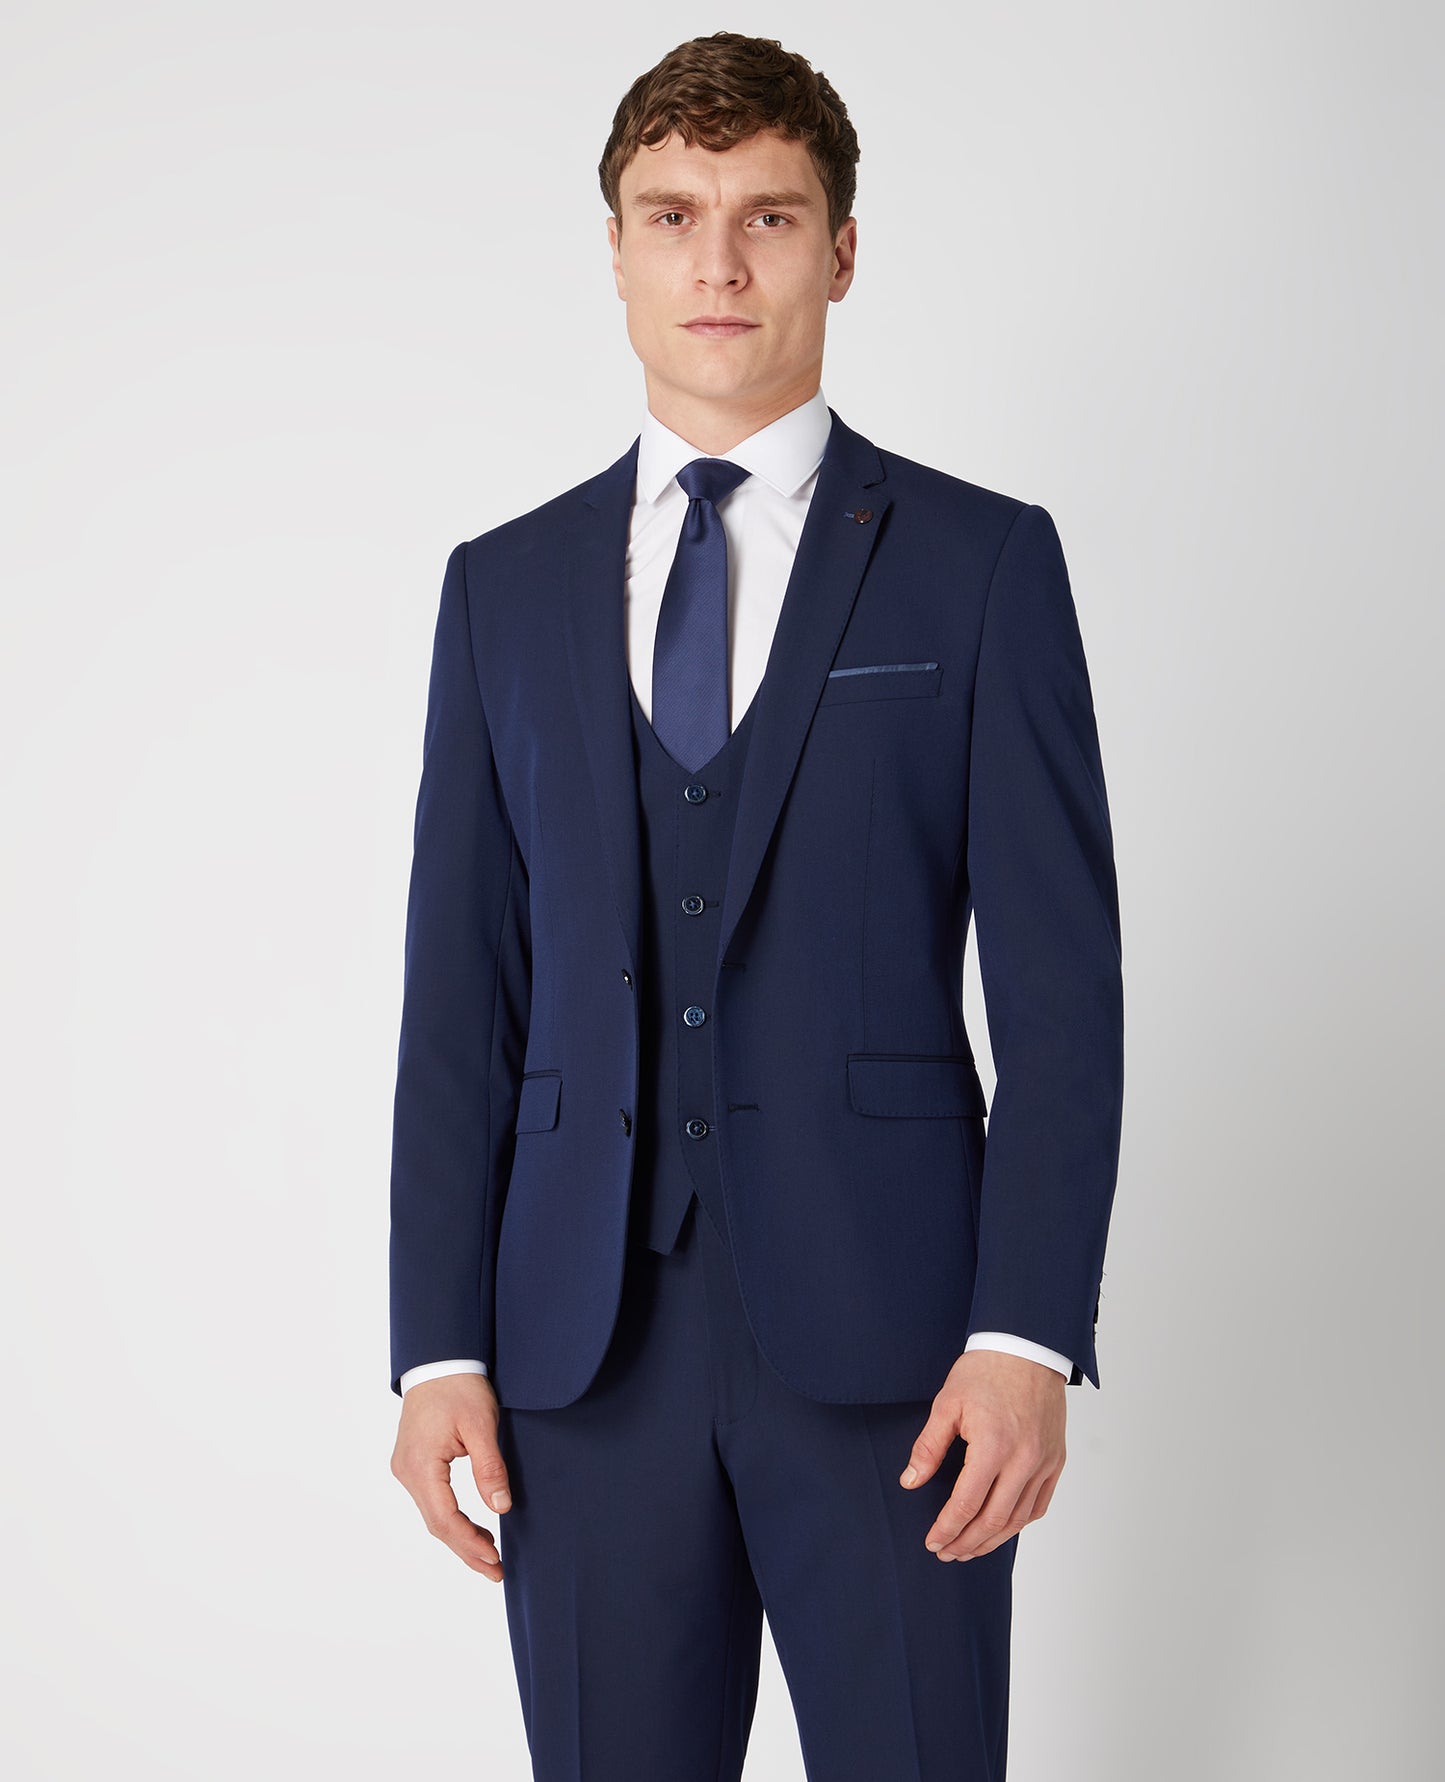 Slim Fit Polyviscose Suit Waistcoat - French Navy